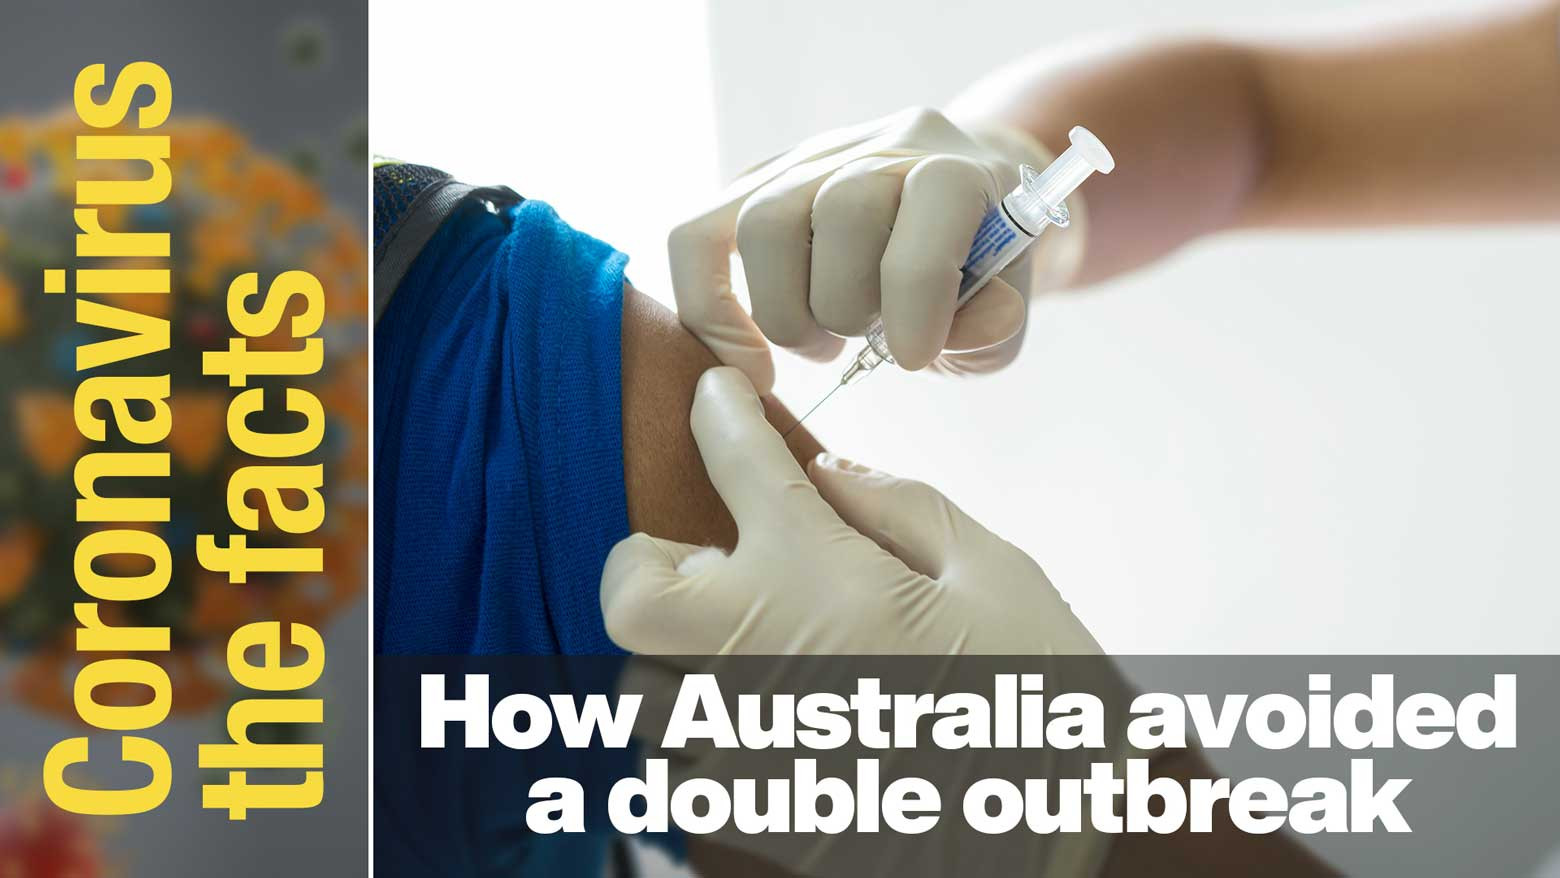 Extra vaccinations helped Australia avoid a simultaneous outbreak of influenza and coronavirus